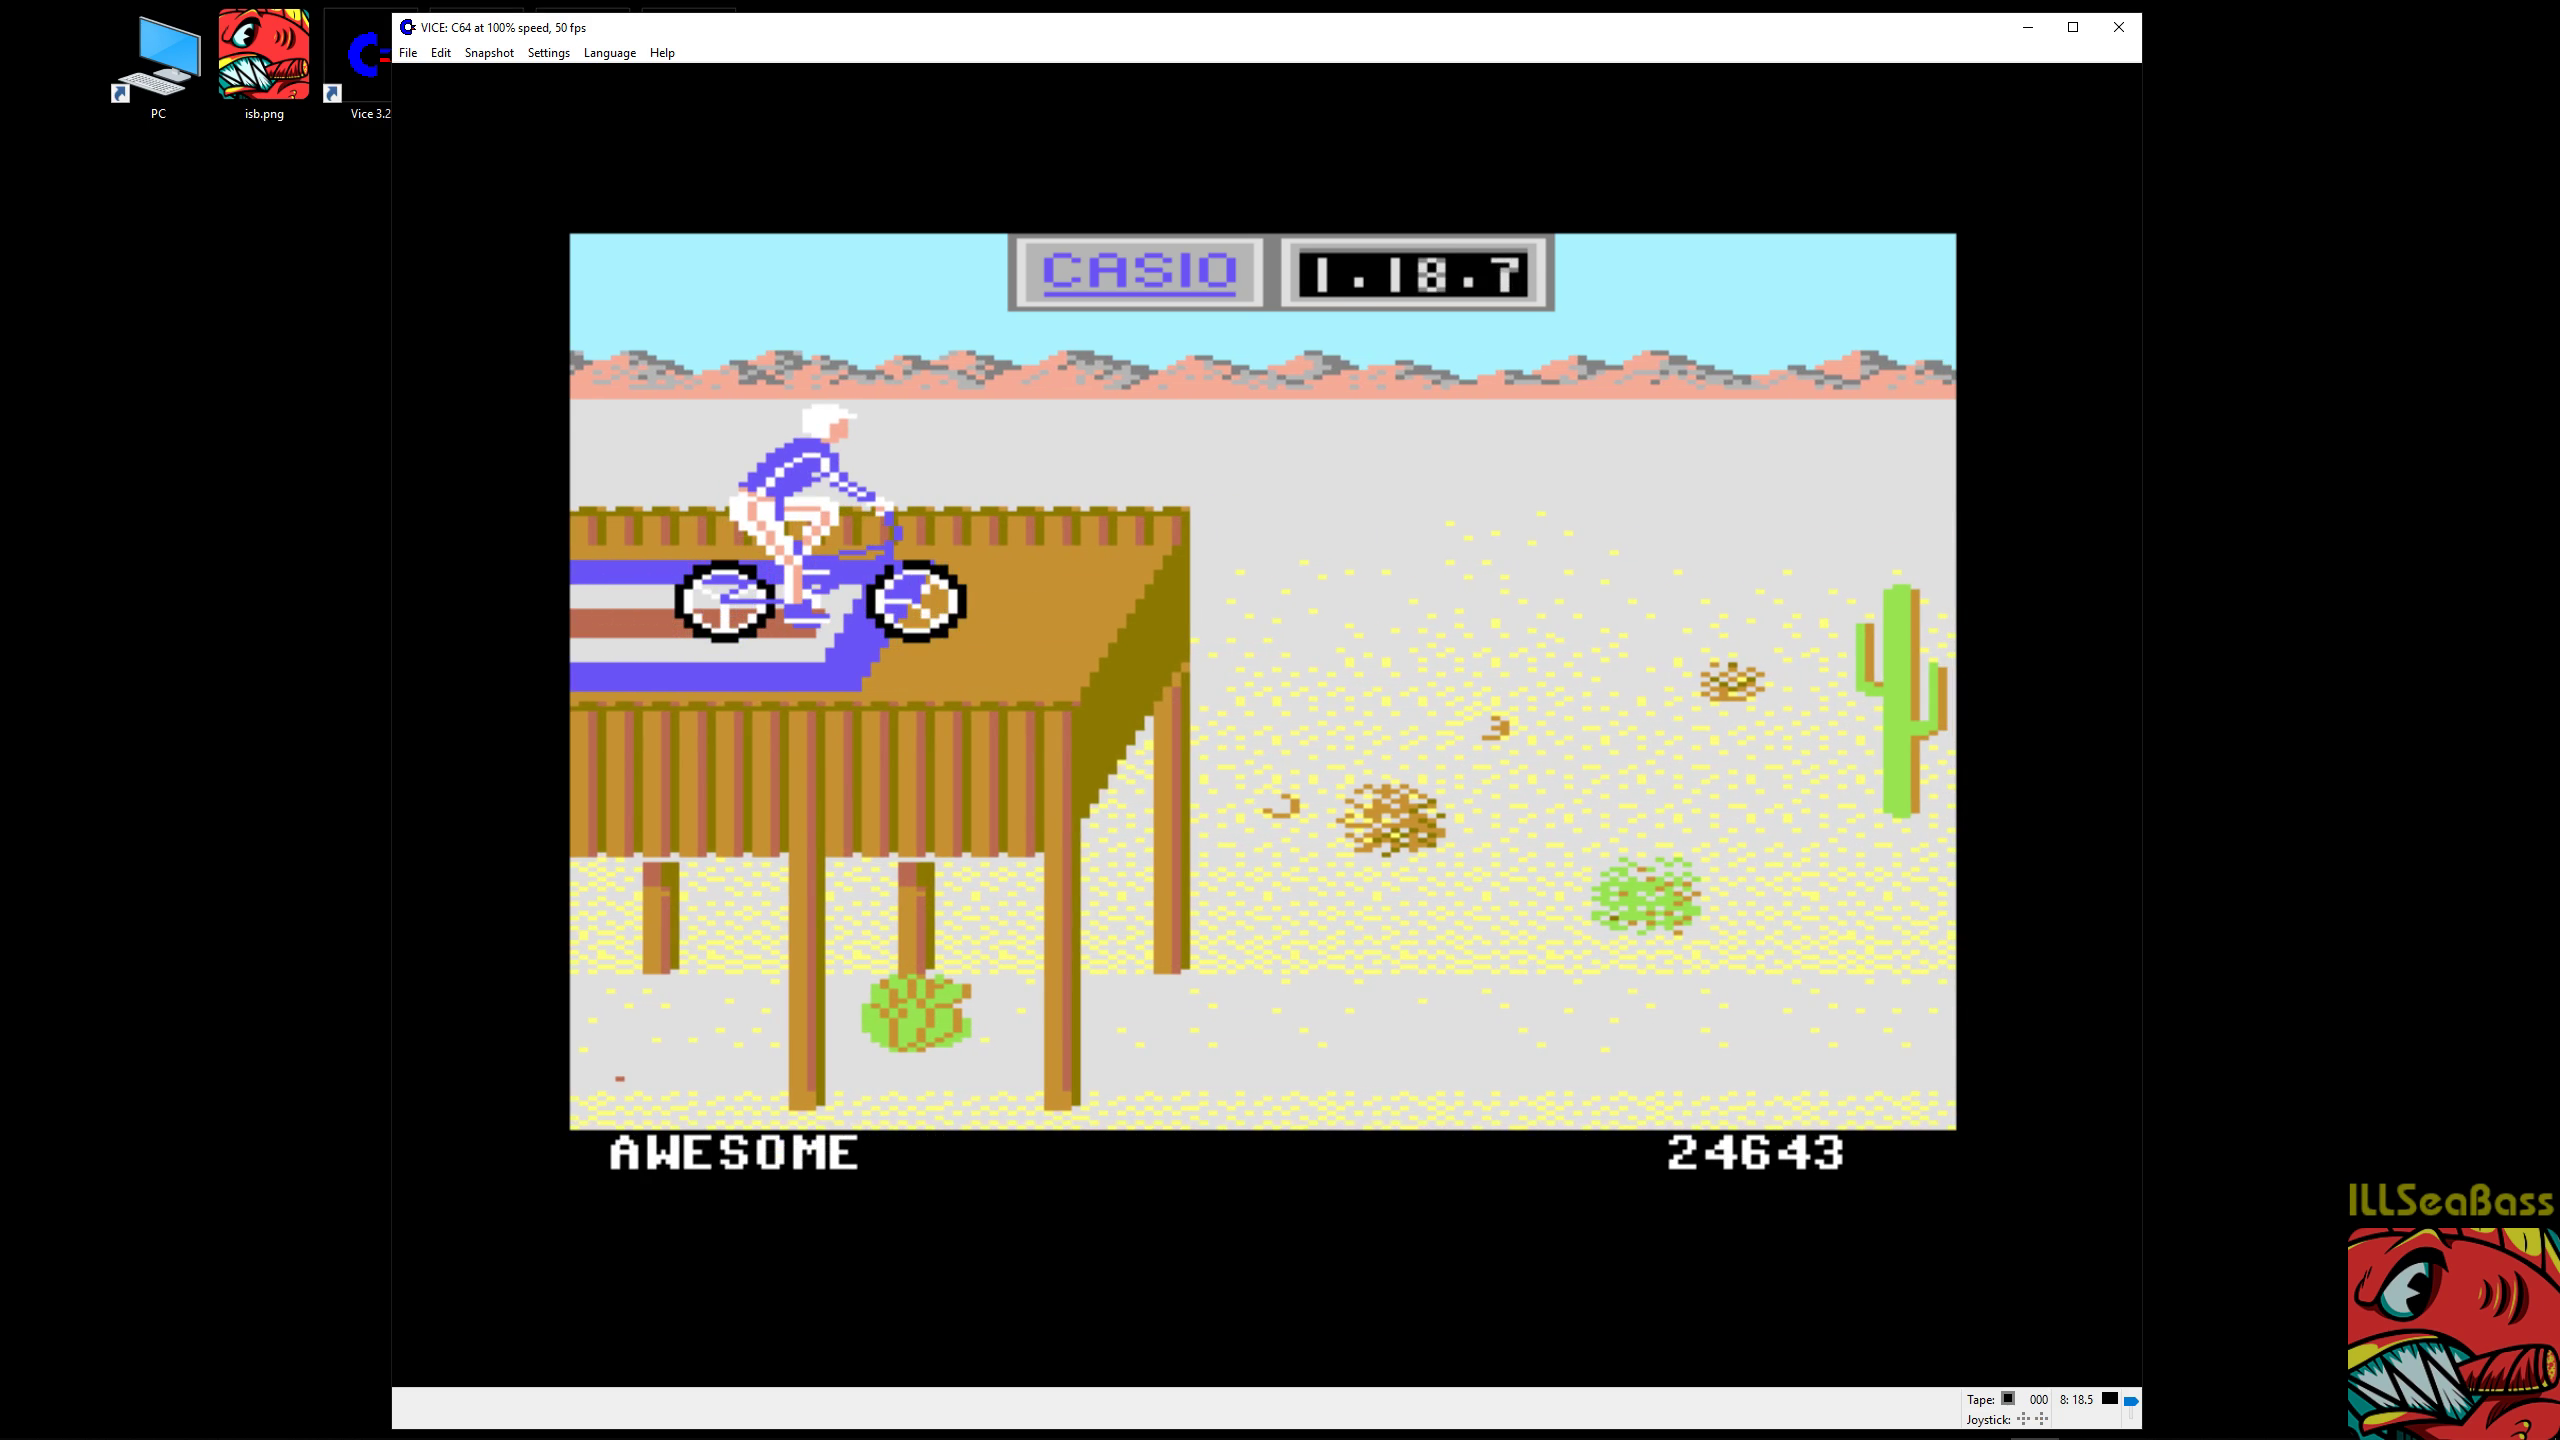 ILLSeaBass: California Games: BMX (Commodore 64 Emulated) 24,643 points on 2019-03-08 21:05:59